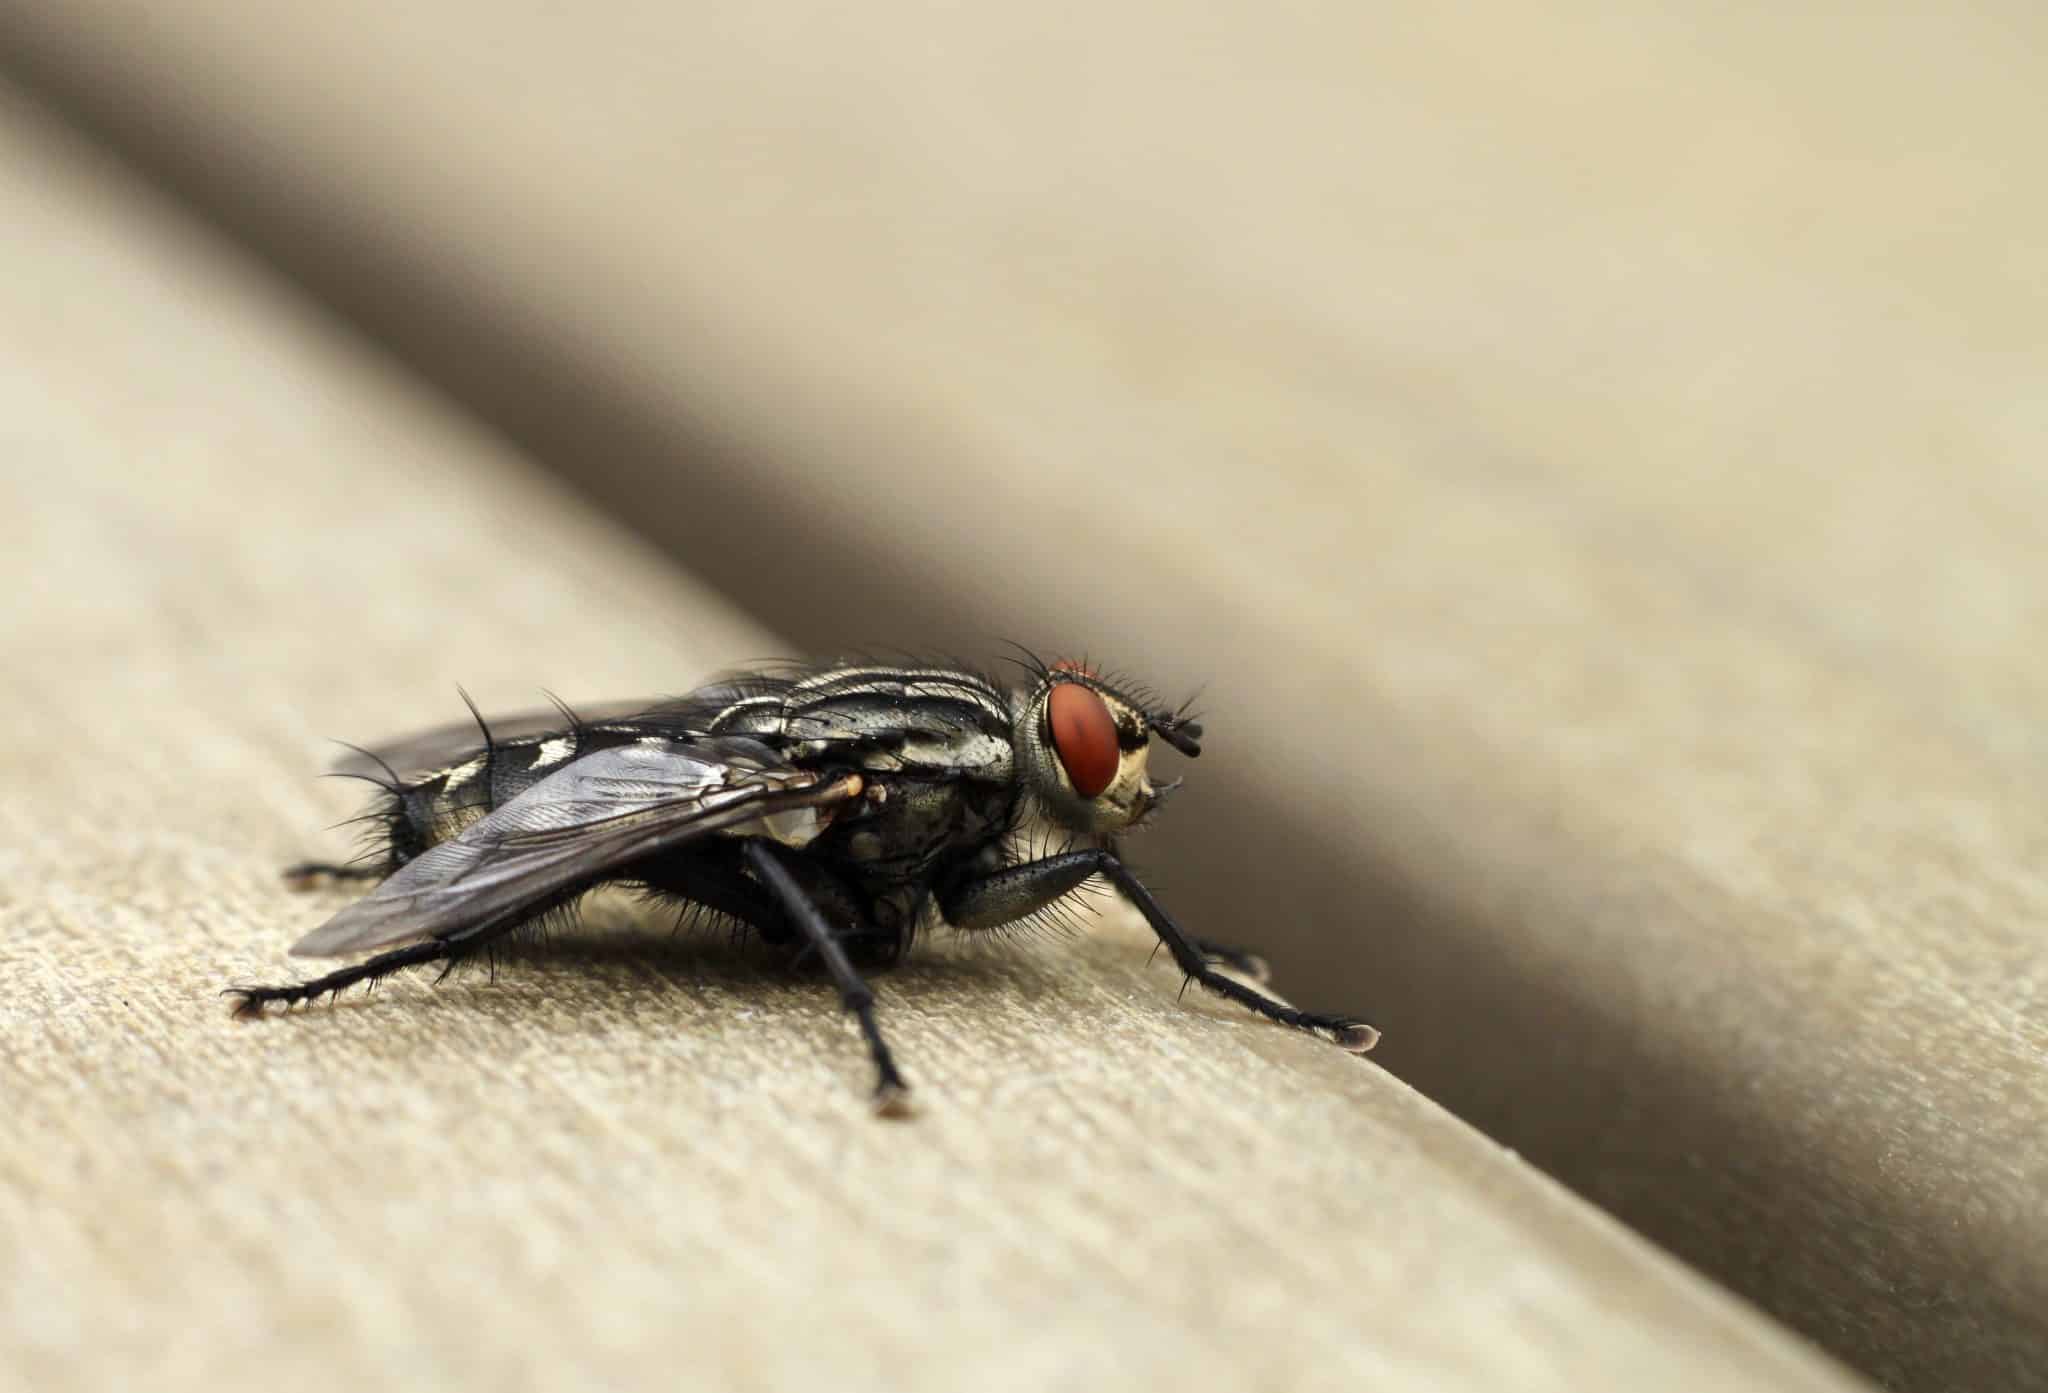 How To Get Rid of Fruit Flies - The Ultimate Guide for 2022